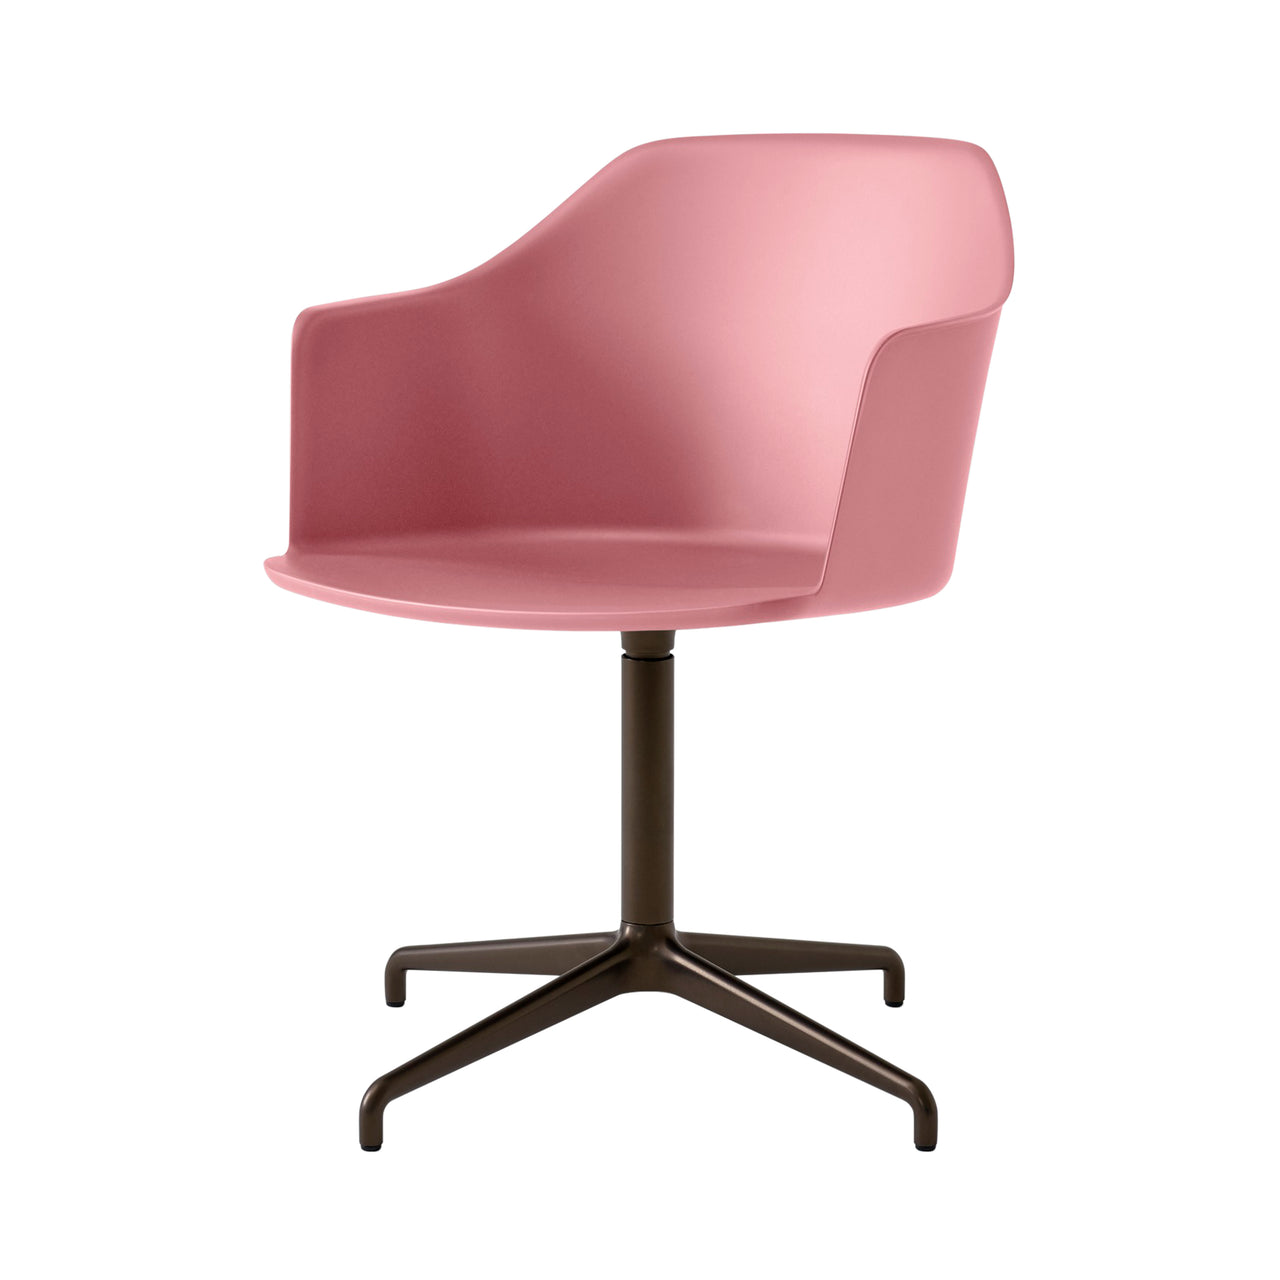 Rely Armchair HW43: Soft Pink + Bronzed